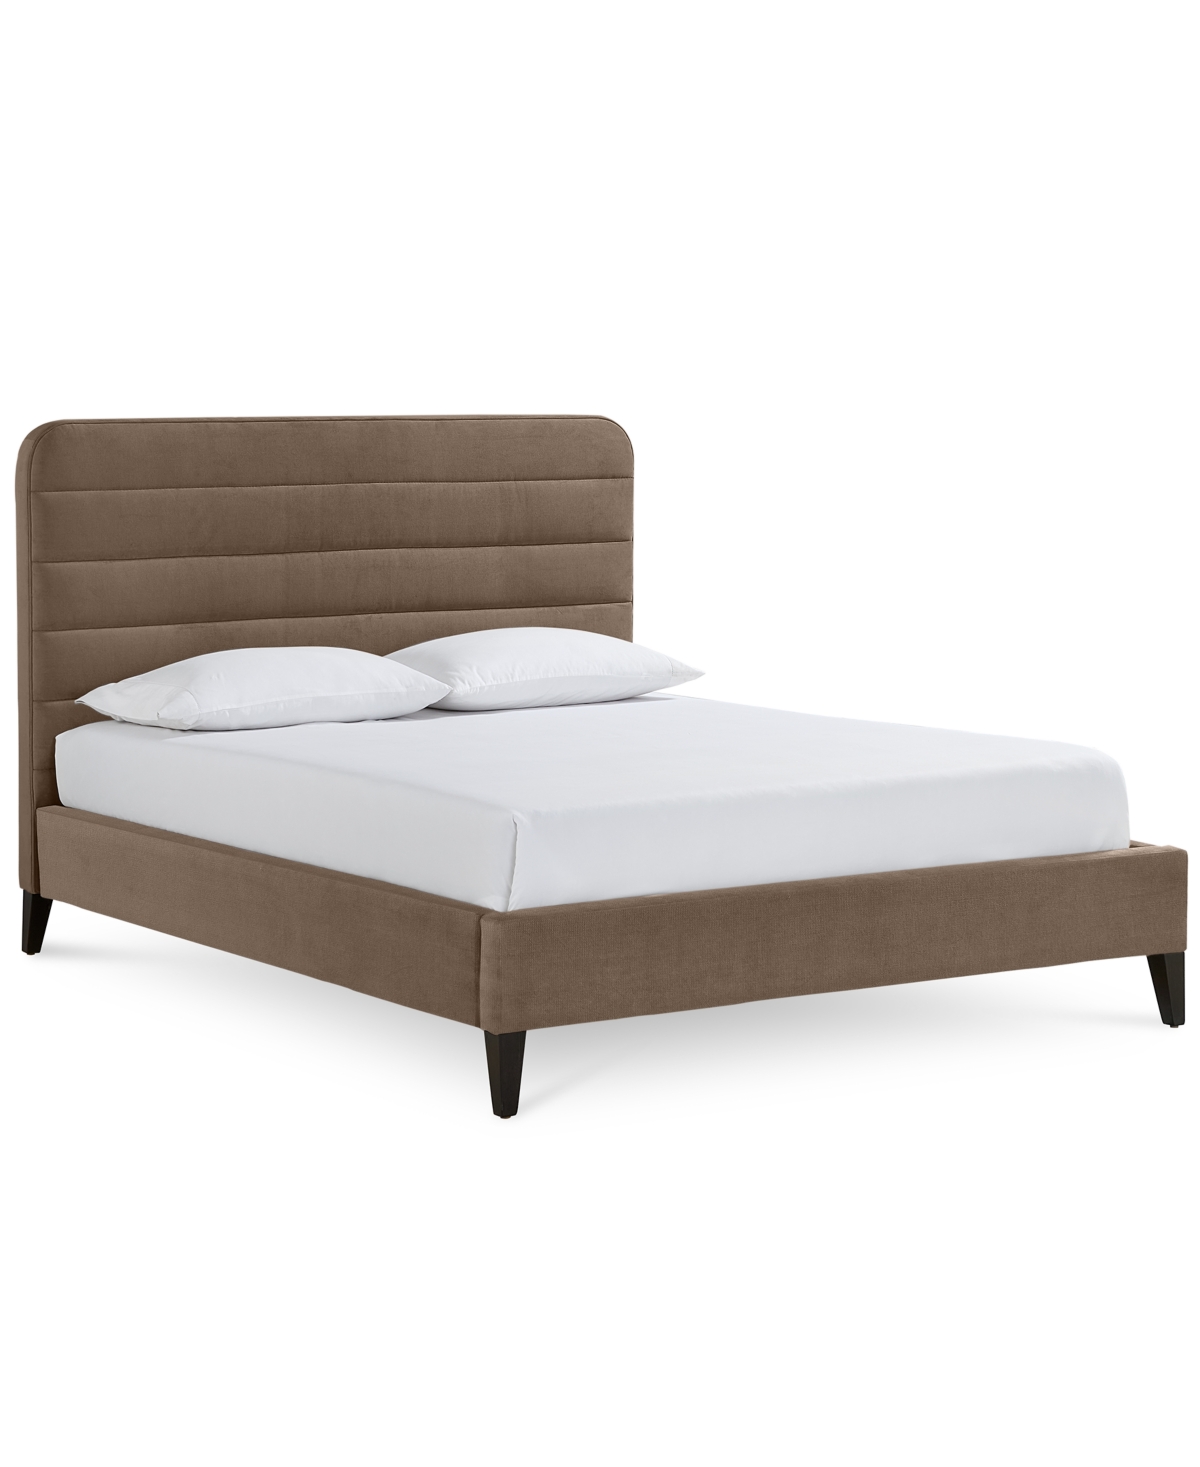 Furniture Haryan Upholstered Twin Bed In Taupe